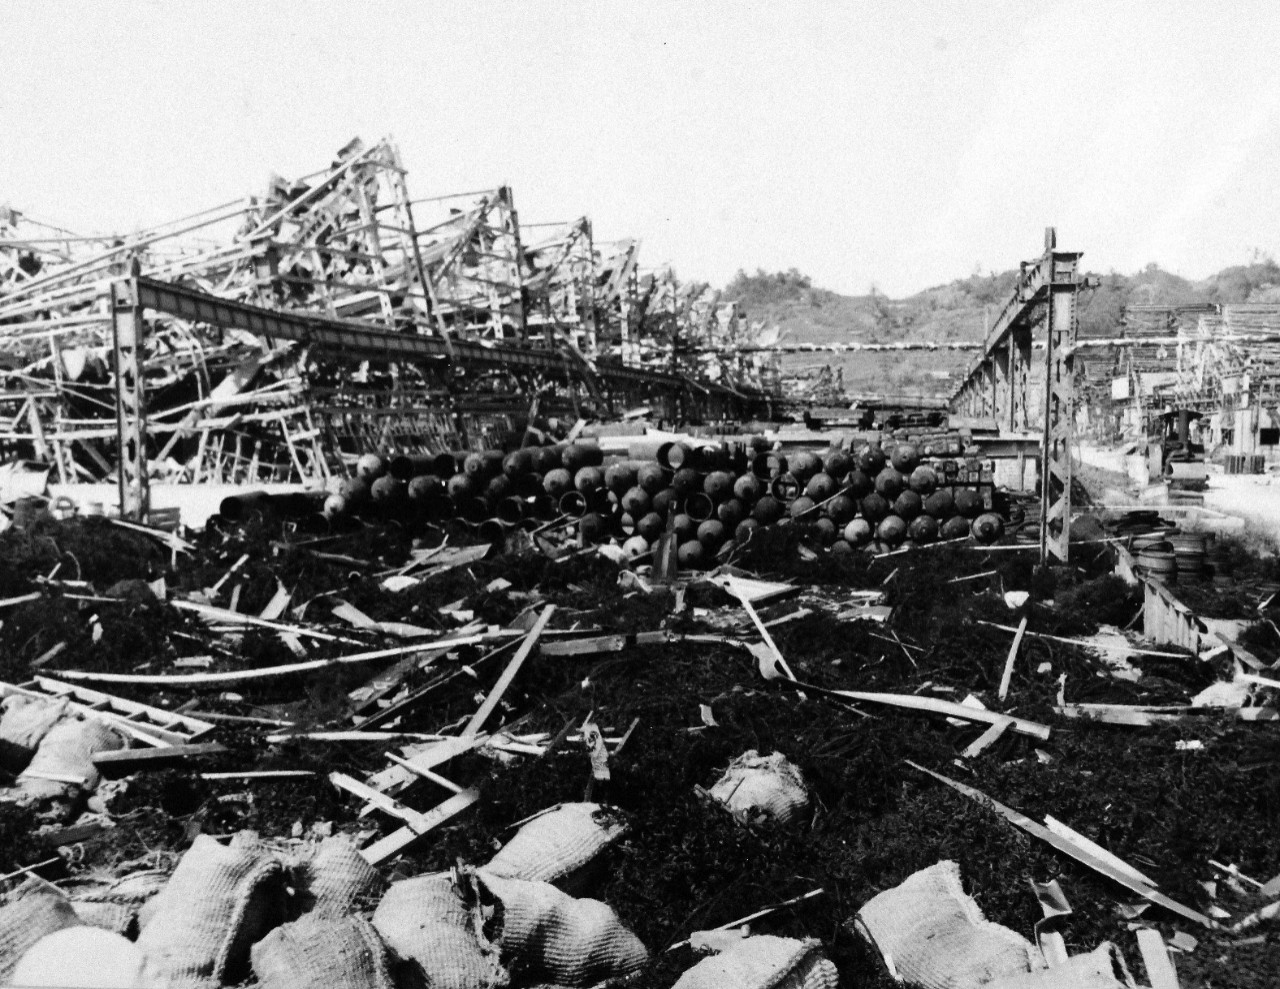 80-G-264908:   Nagasaki, Japan, 1945.   View of the bomb damage from August 9, 1945.   Photographed by USS Chenango (CVE-28) aircraft on October 15, 1945.  Official U.S. Navy photograph, now in the collections of the National Archives.   (2015/12/01).